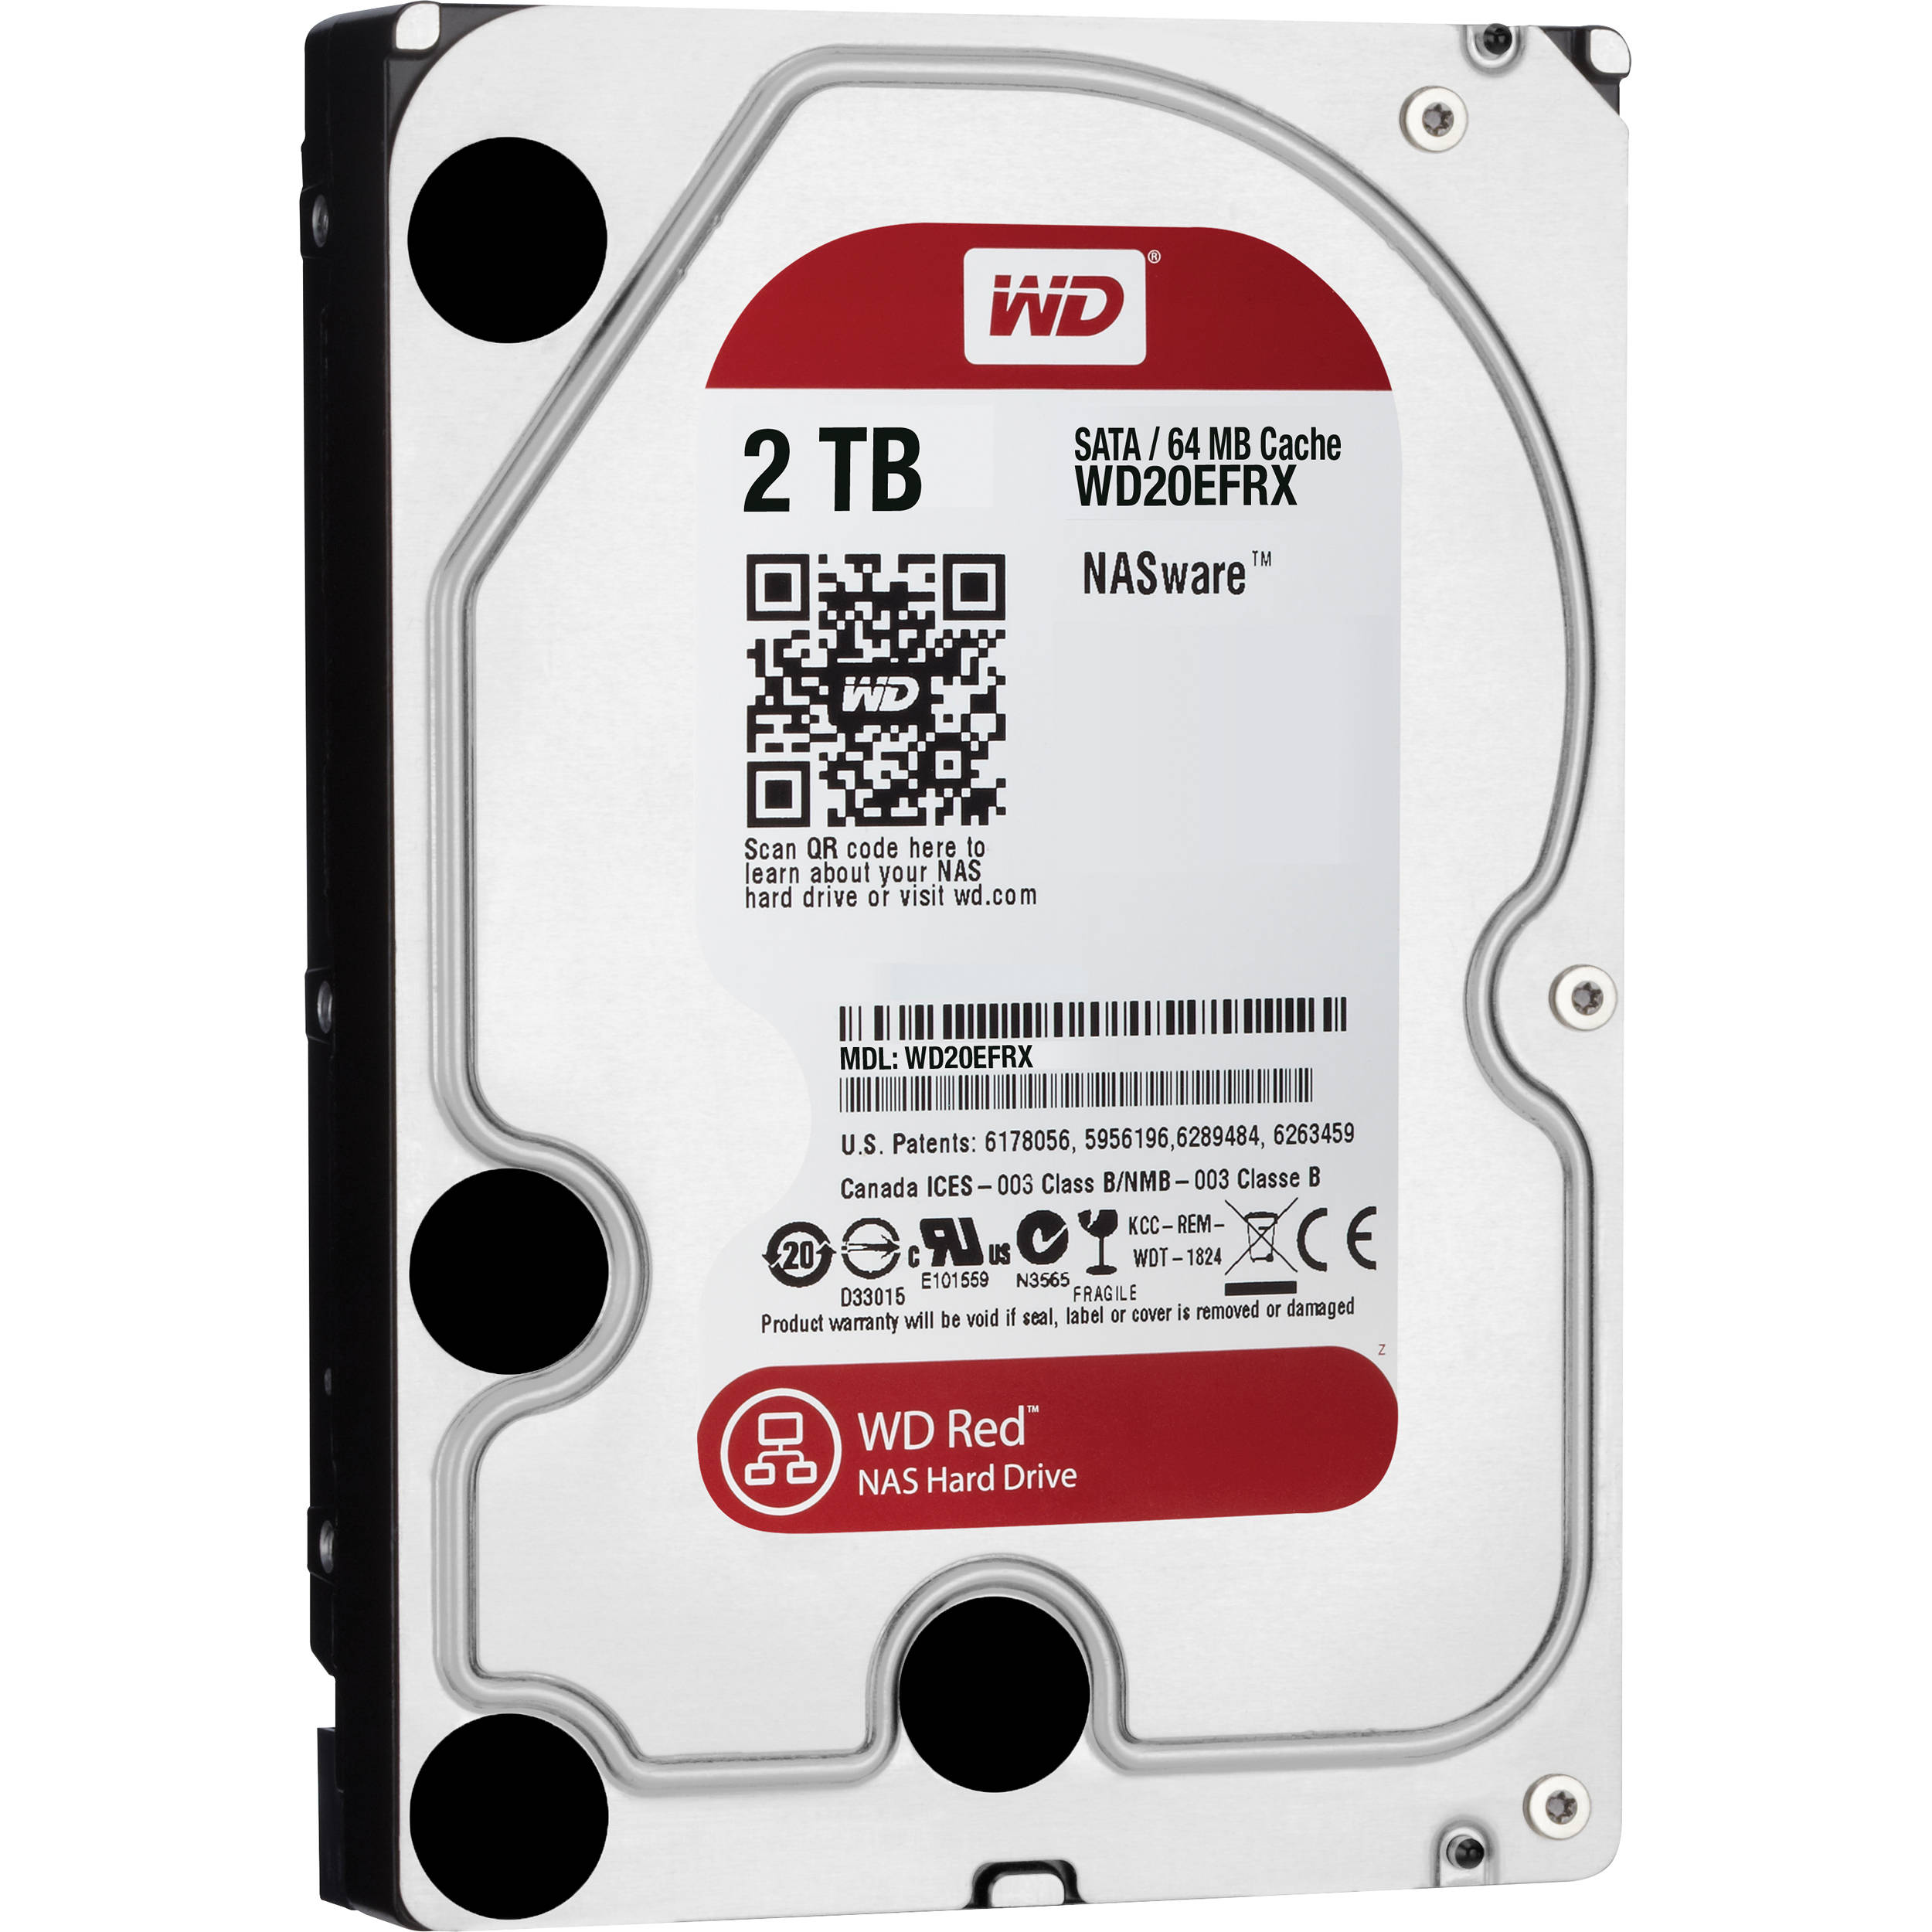 WD RED 2TB 5400RPM 64MB SATA3 6Gbit/sn WD20EFRX NAS HDD